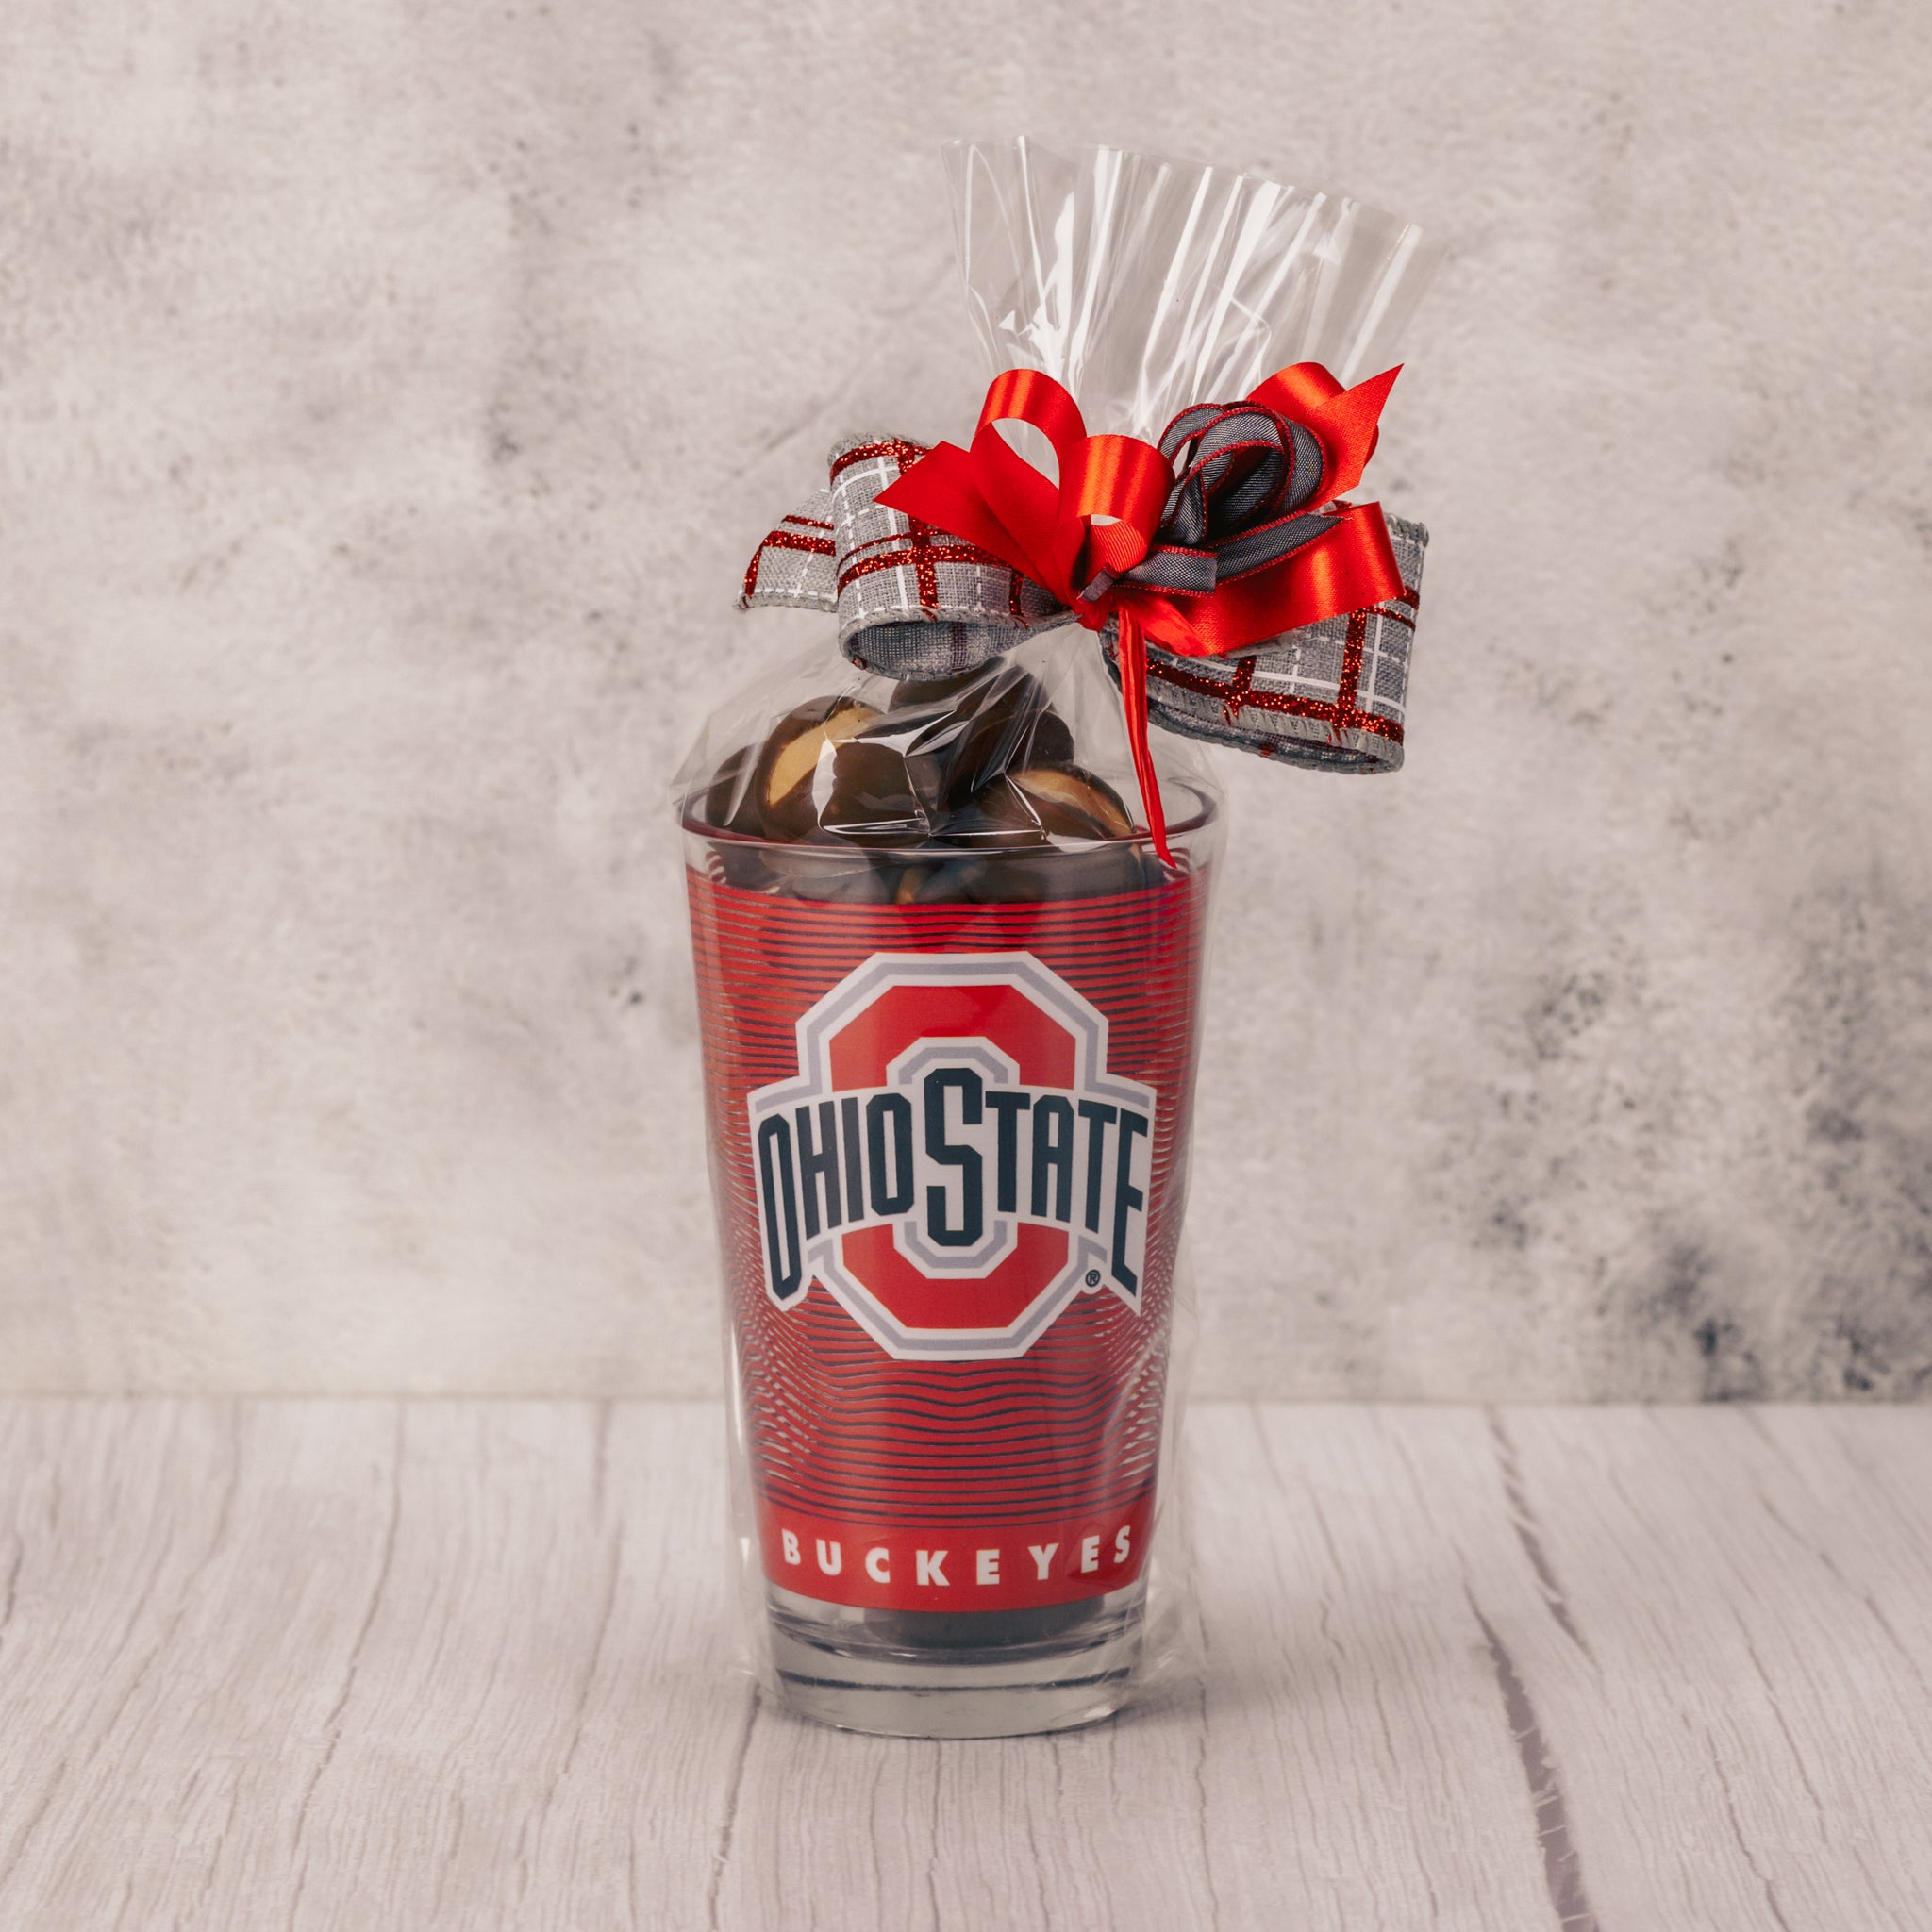 Ohio State Buckeyes Tumbler Bouquet, Cincinnati (OH) Gift Delivery